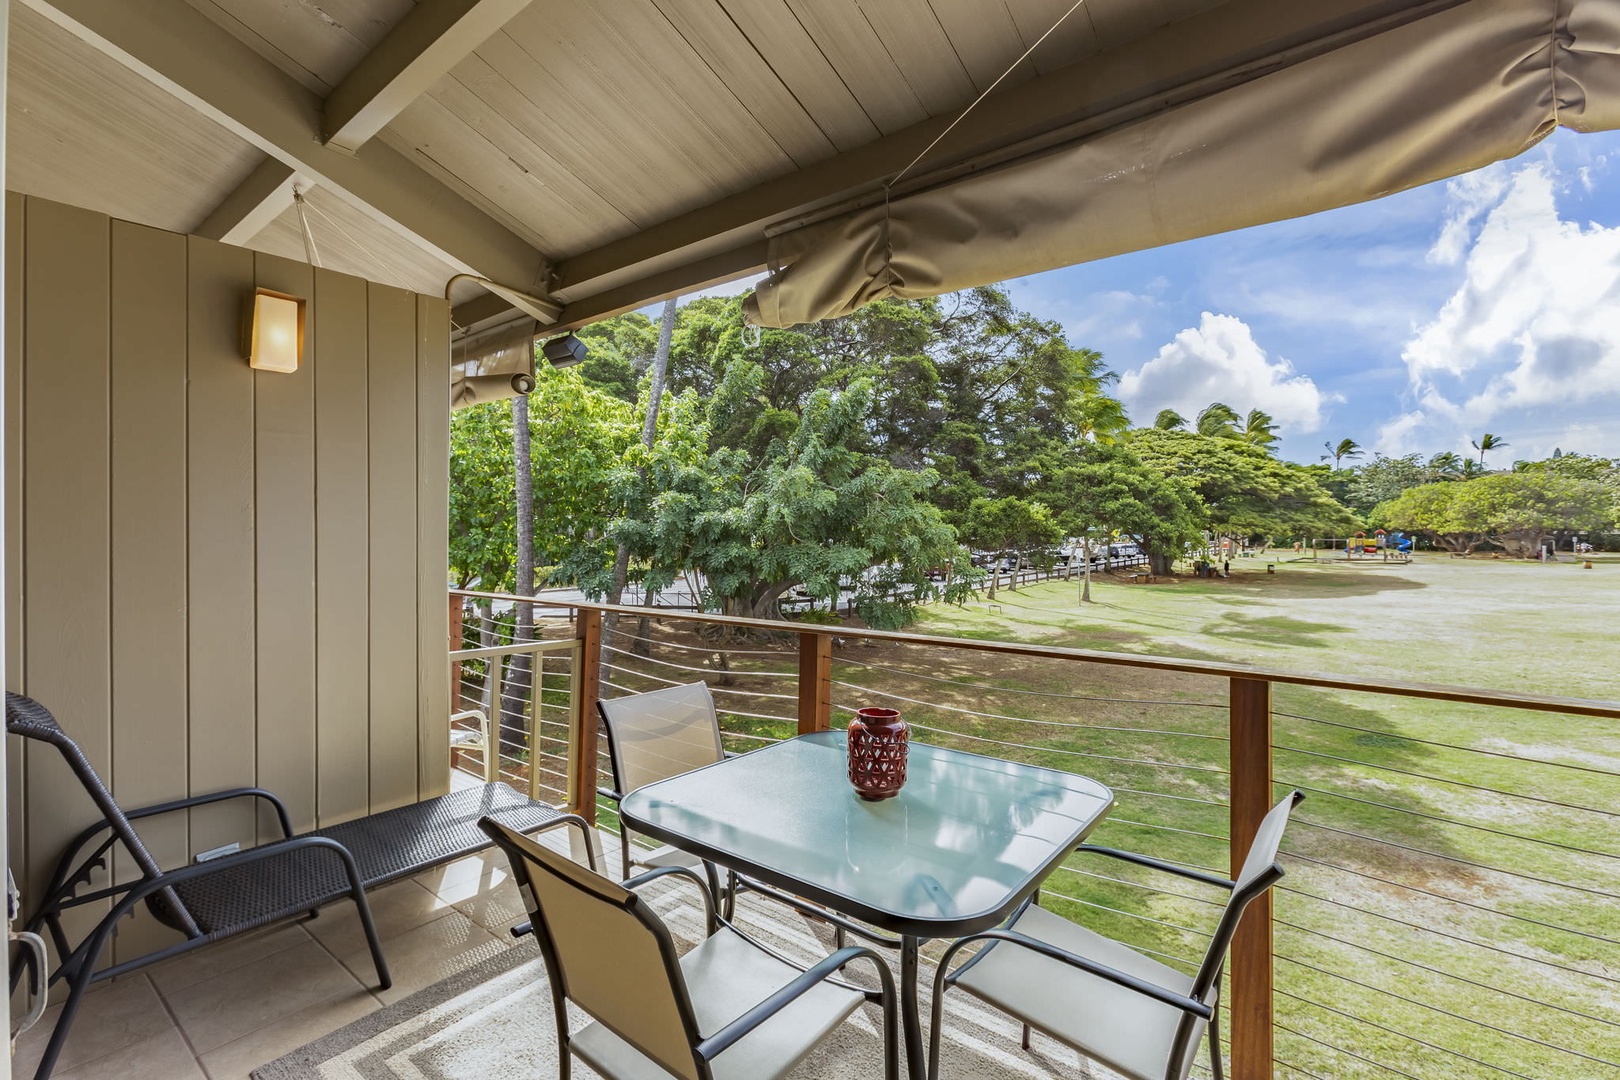 Outdoor dining on the lanai for up to 4